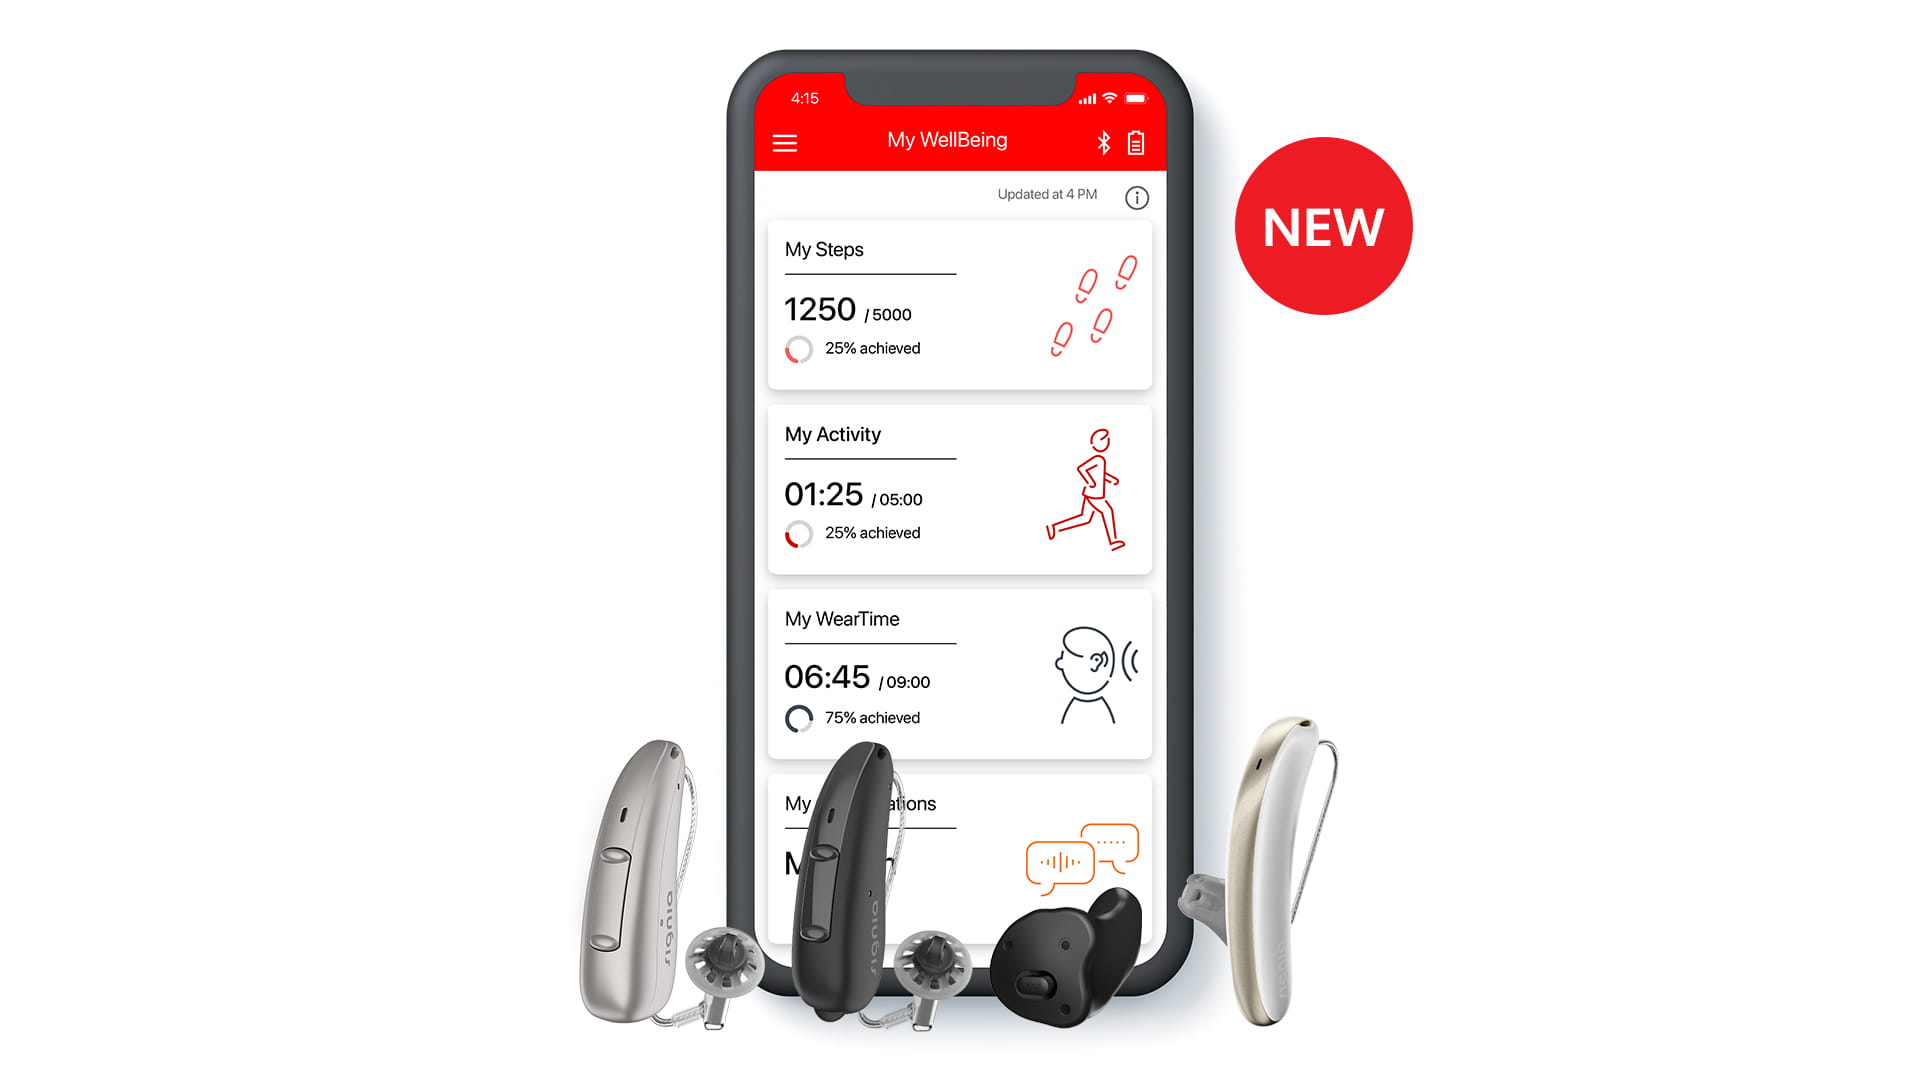 Pure 312 AX, Pure Charge&Go AX, Insio Charge&Go AX, Styletto AX hearing aids in front of My WellBeing app